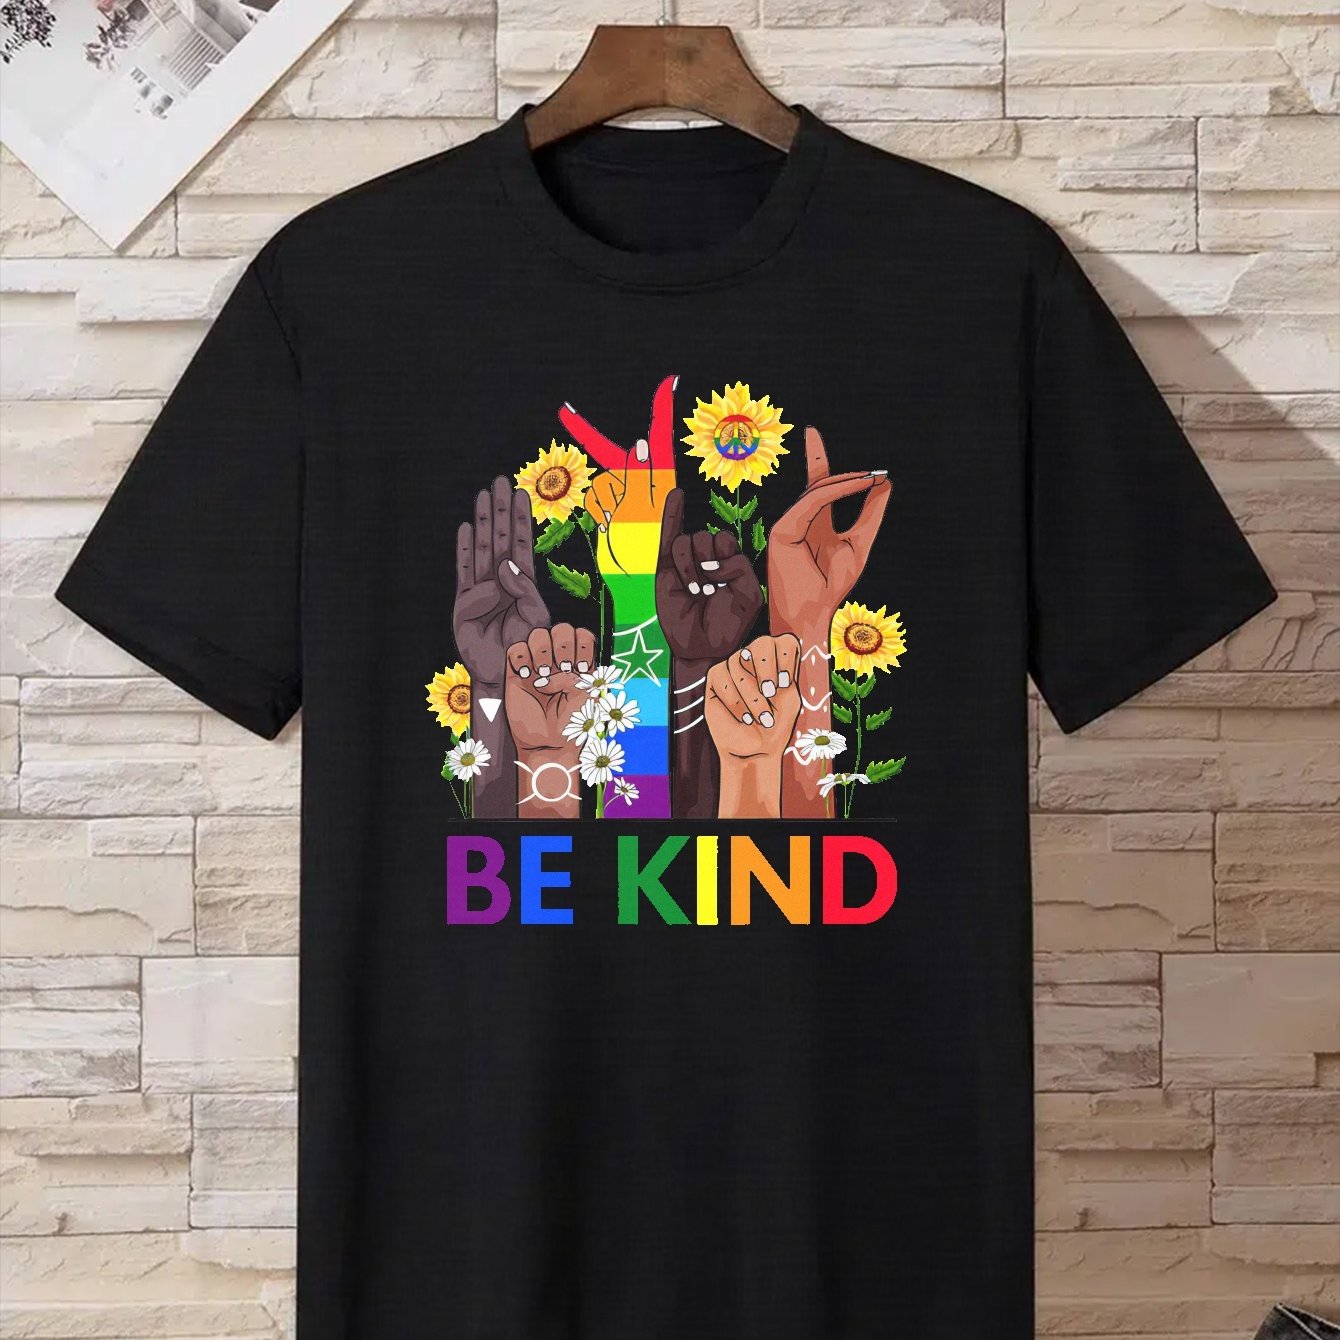 Men's Casual Be Kind Hands Print Crew Neck Short Sleeves T Shirts For ...